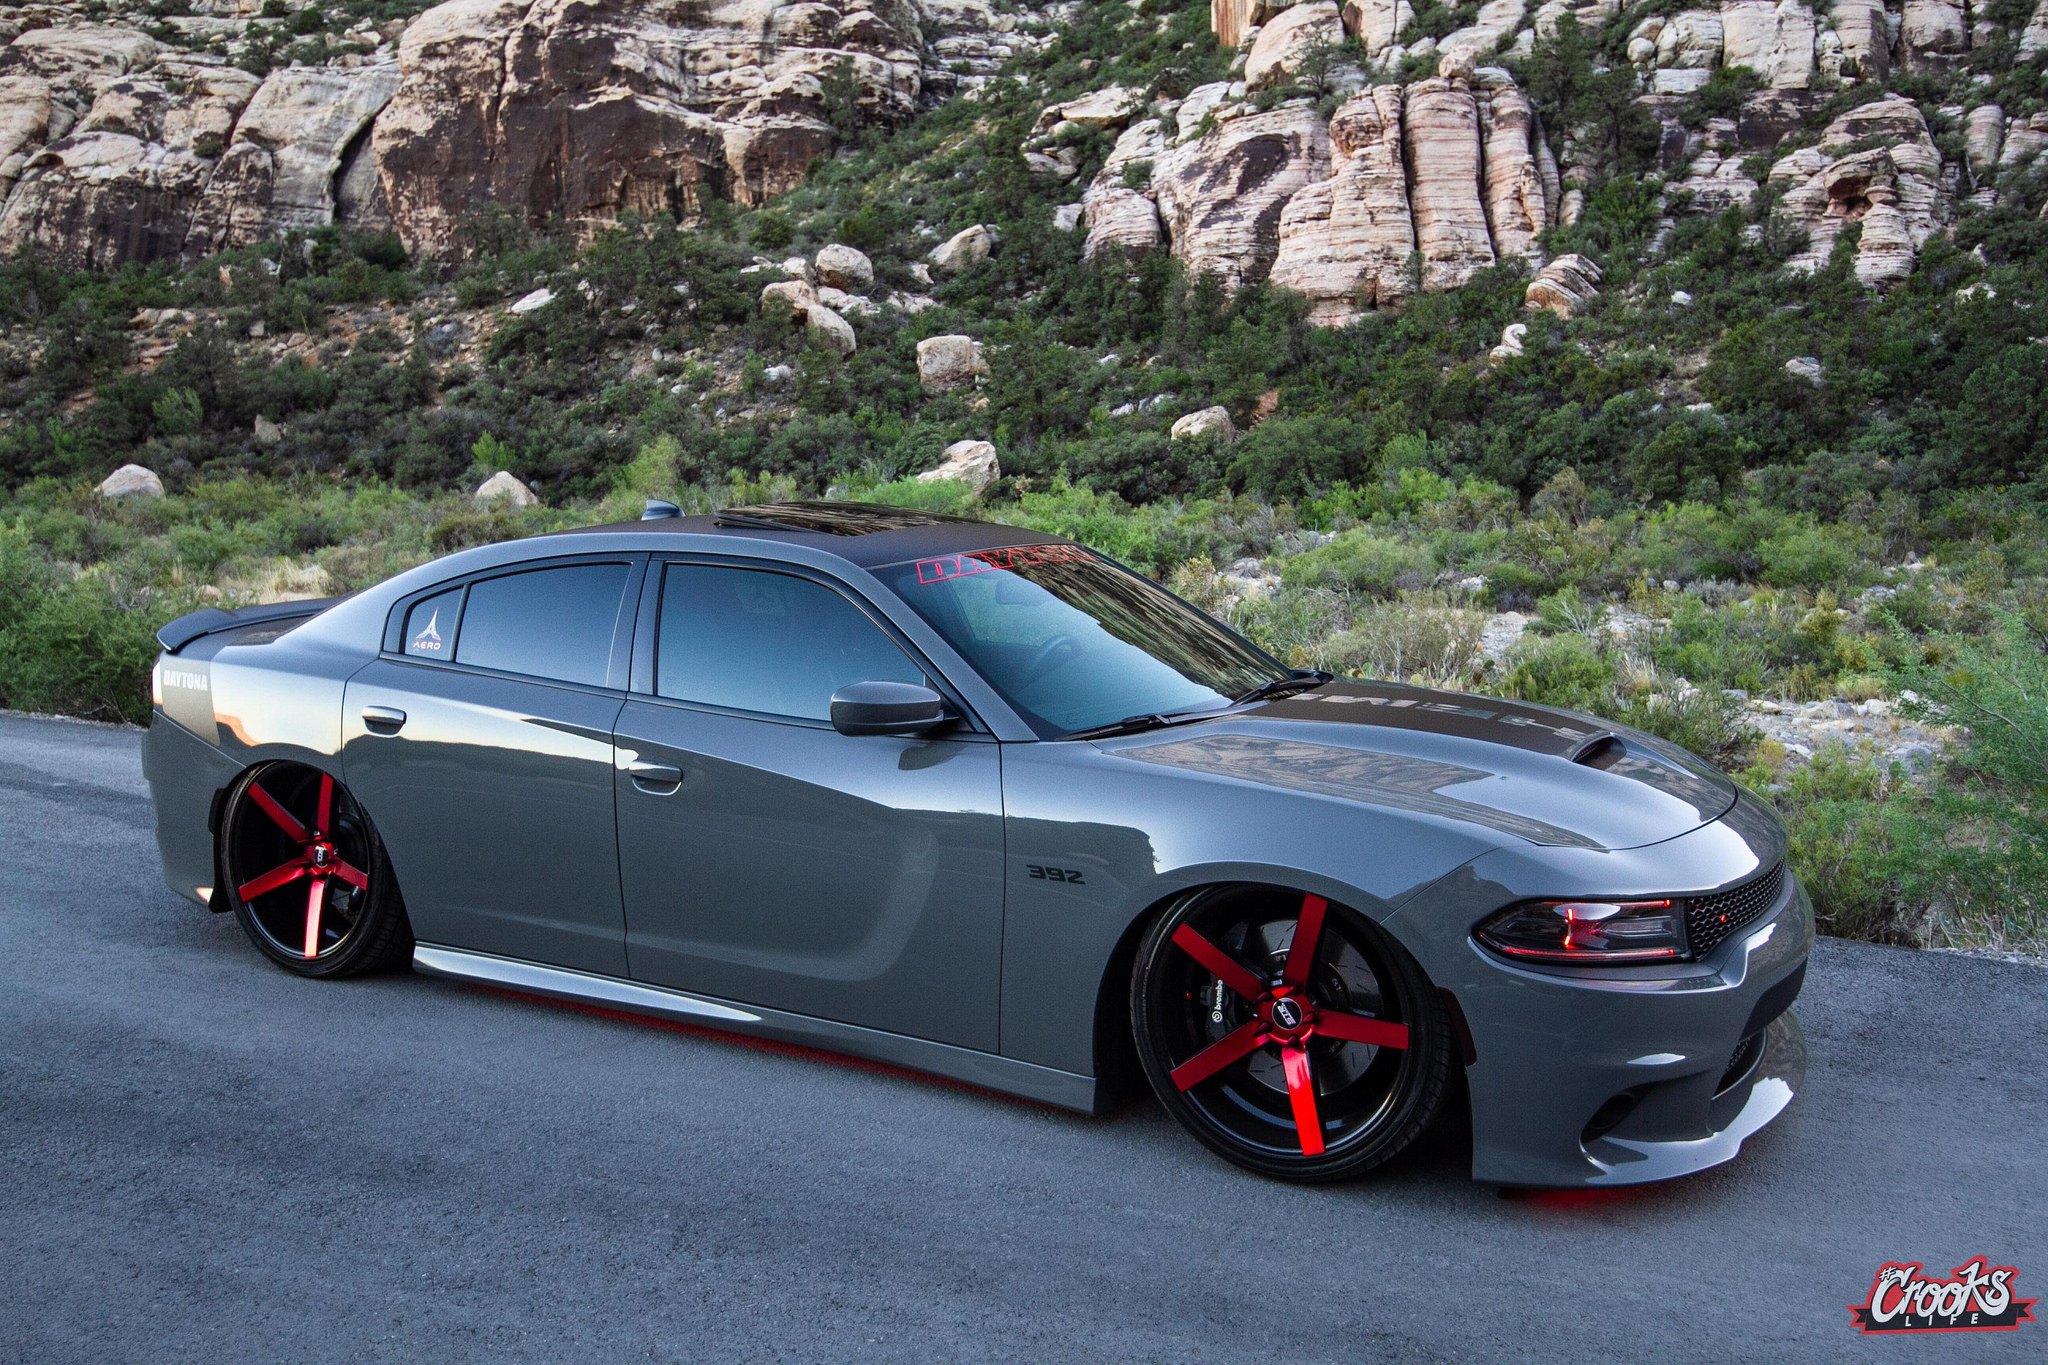 Gray Dodge Charger with Gloss Red STR Wheels - Photo by Jimmy Crook